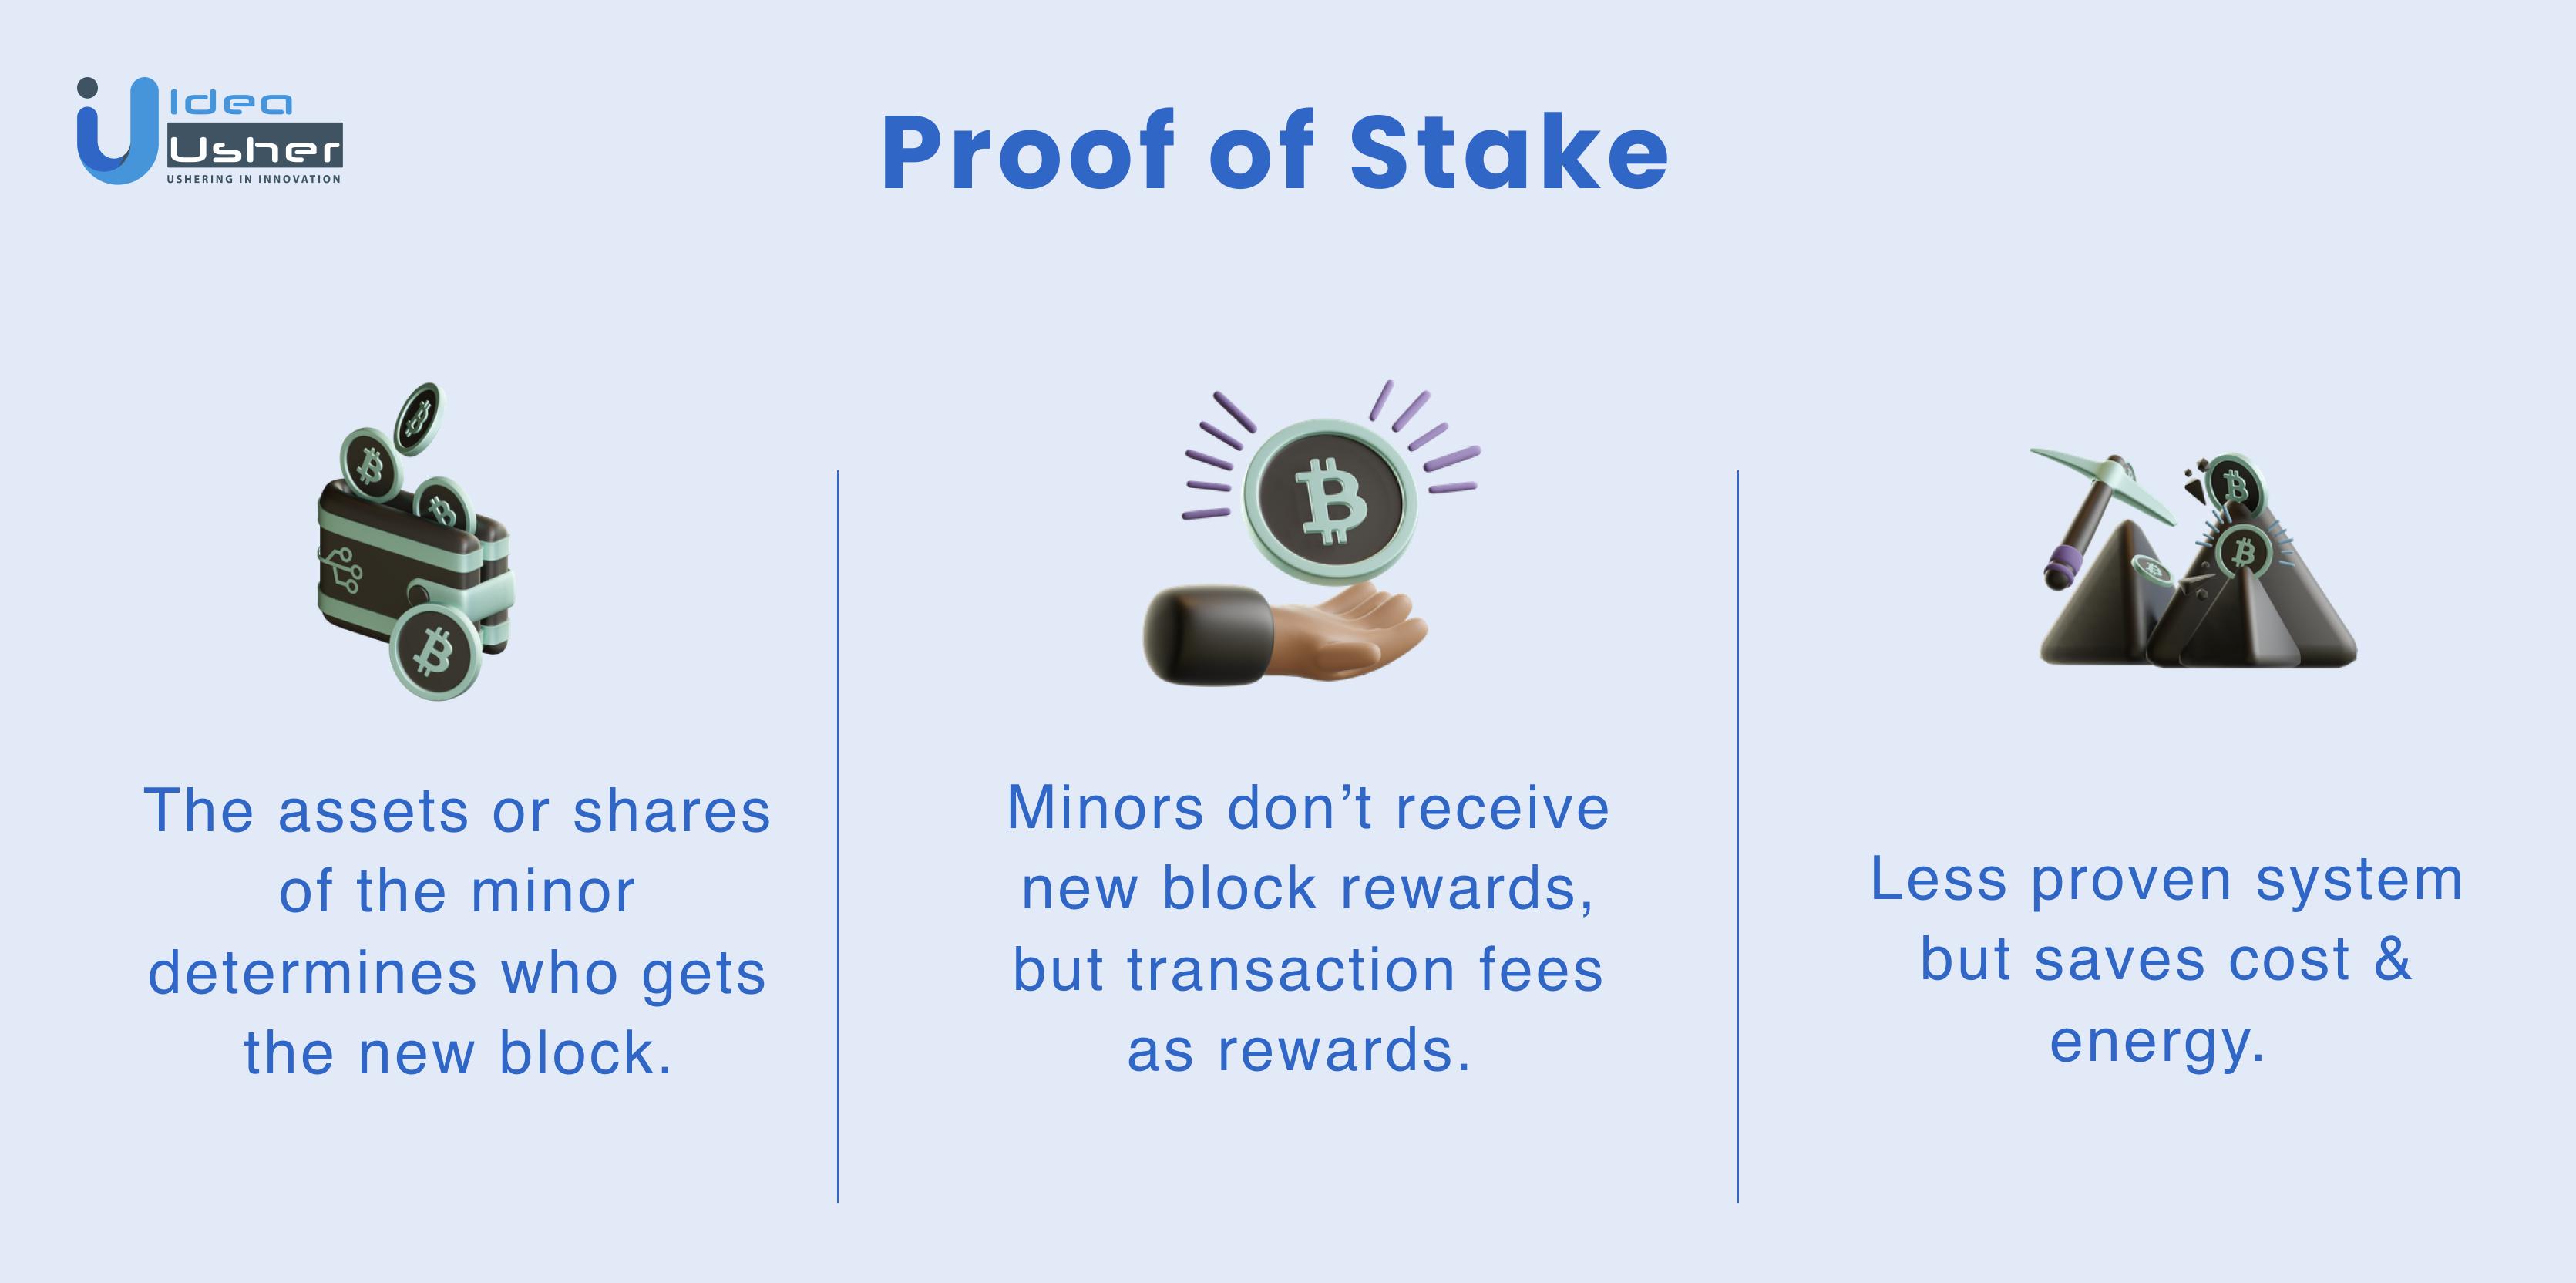 Proof of stake